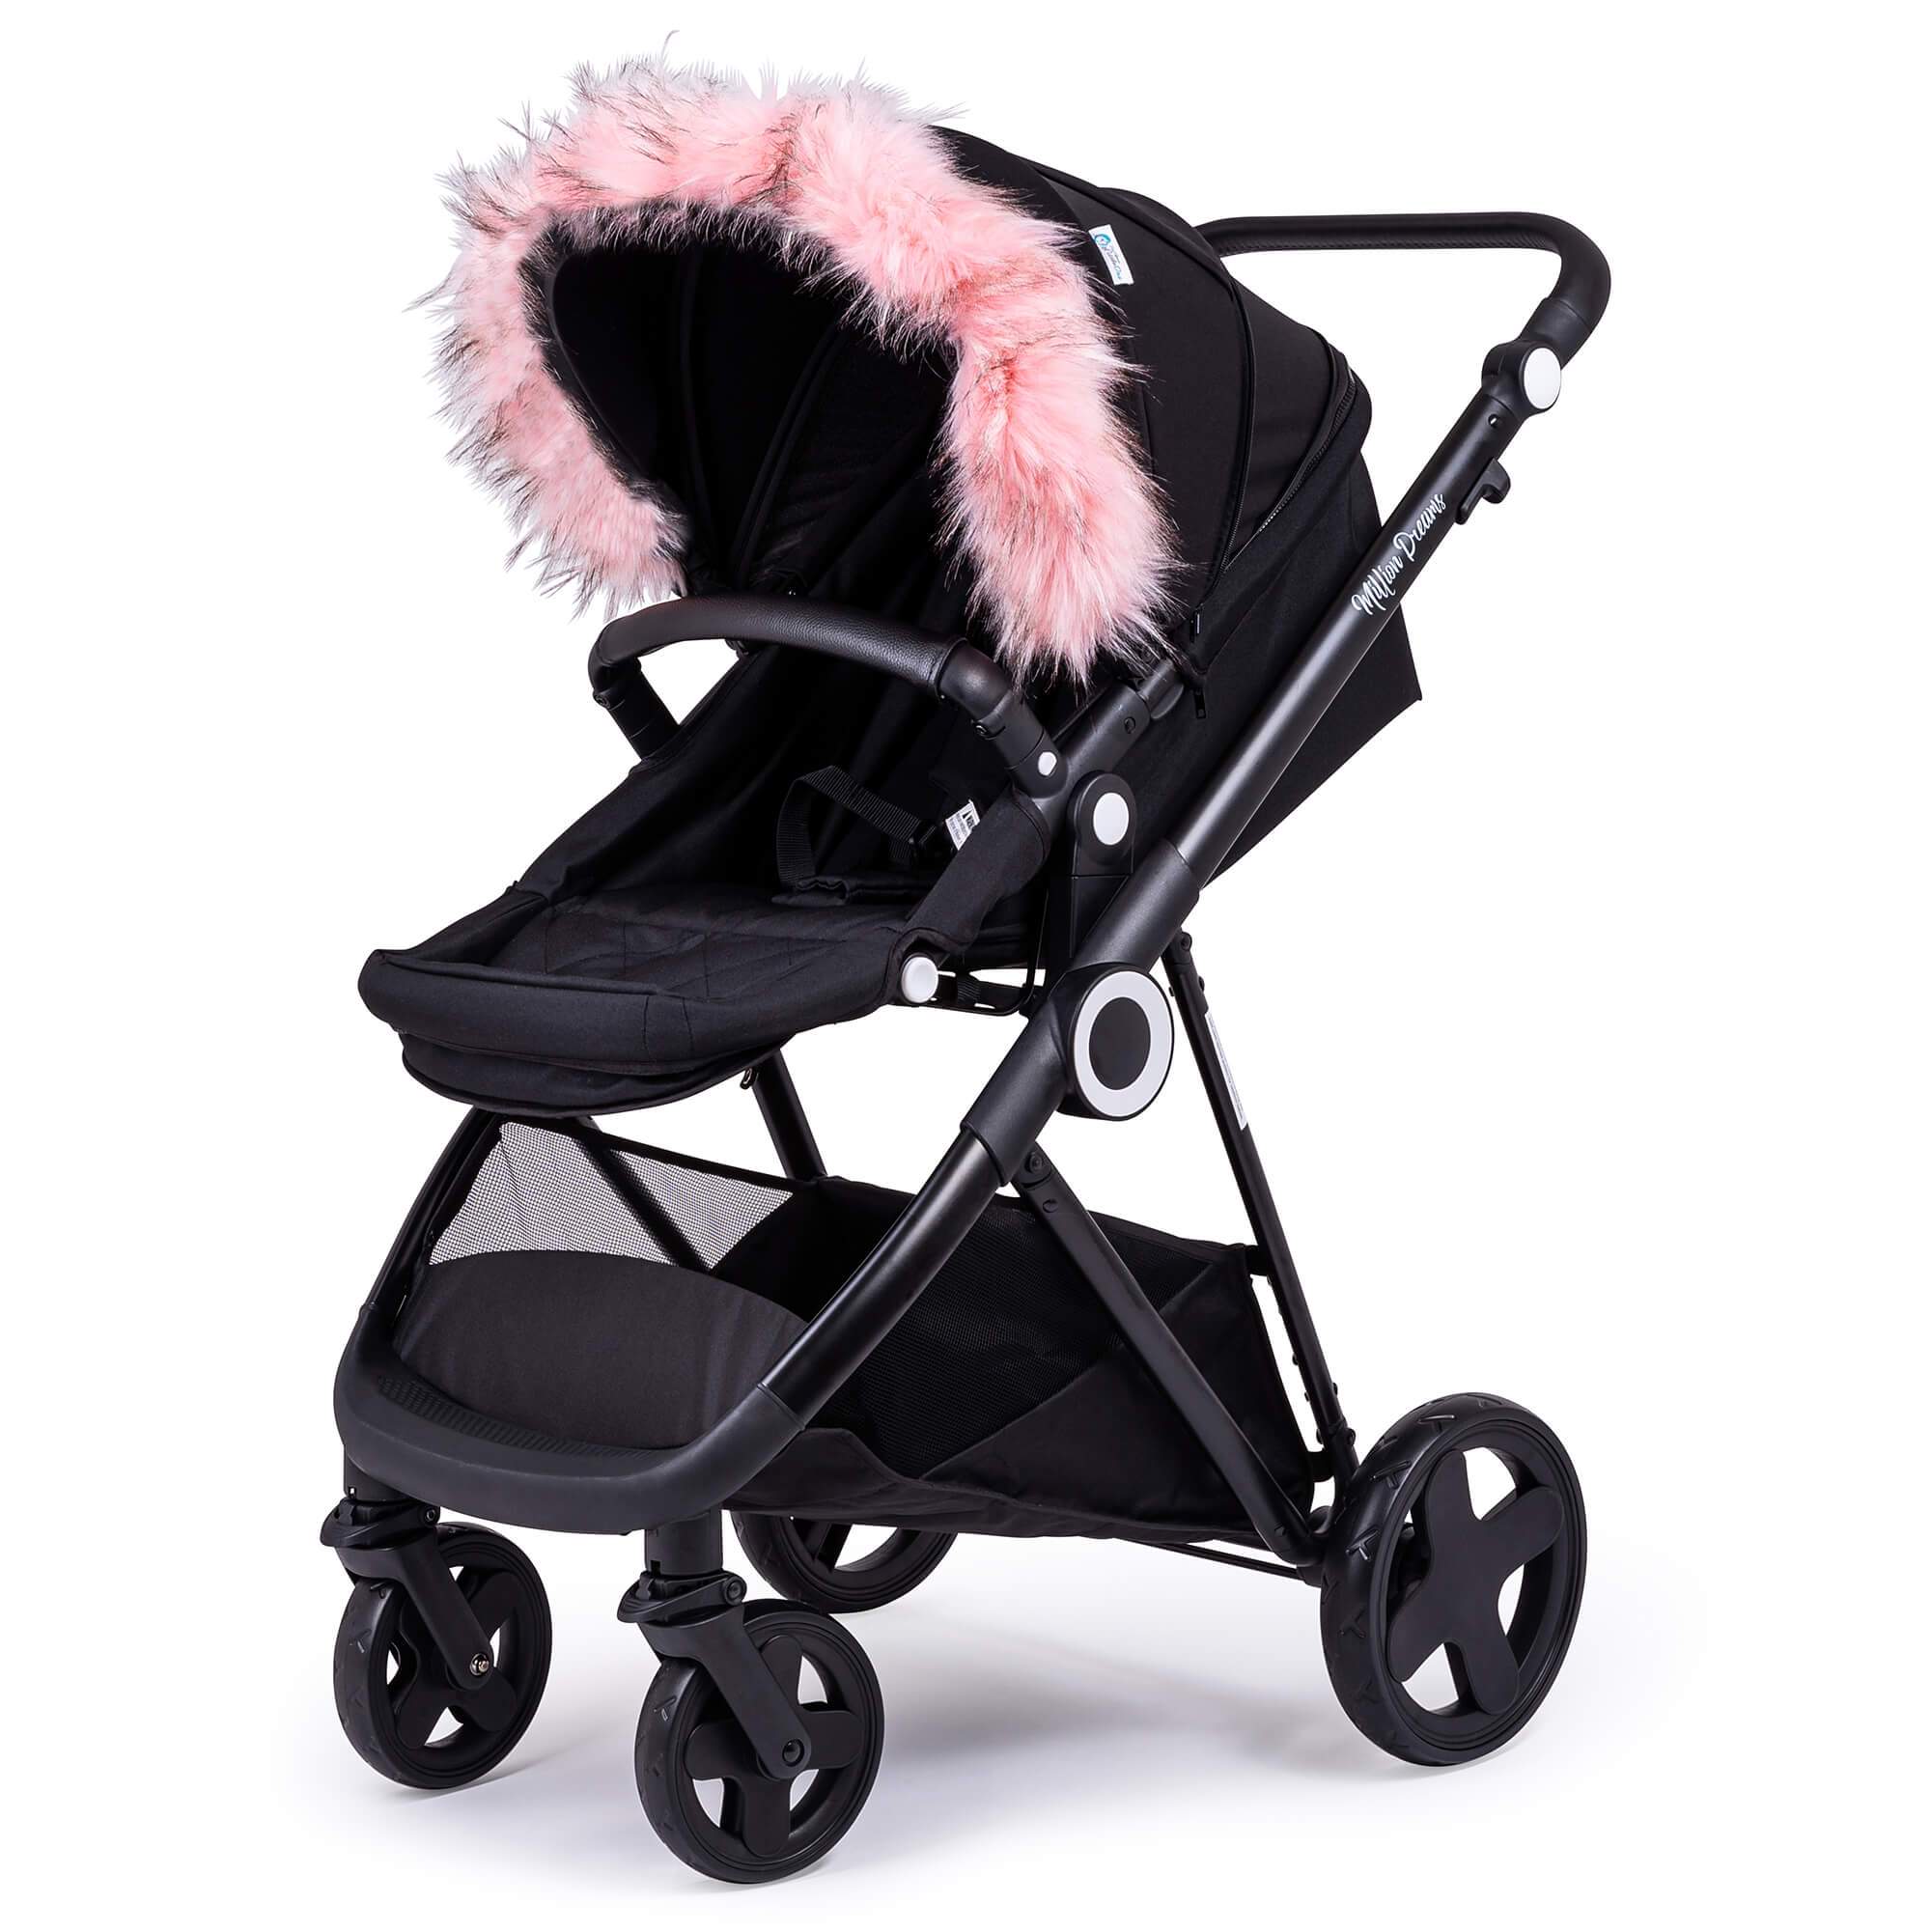 Pram Fur Hood Trim Attachment for Pushchair Compatible with TFK - Light Pink / Fits All Models | For Your Little One